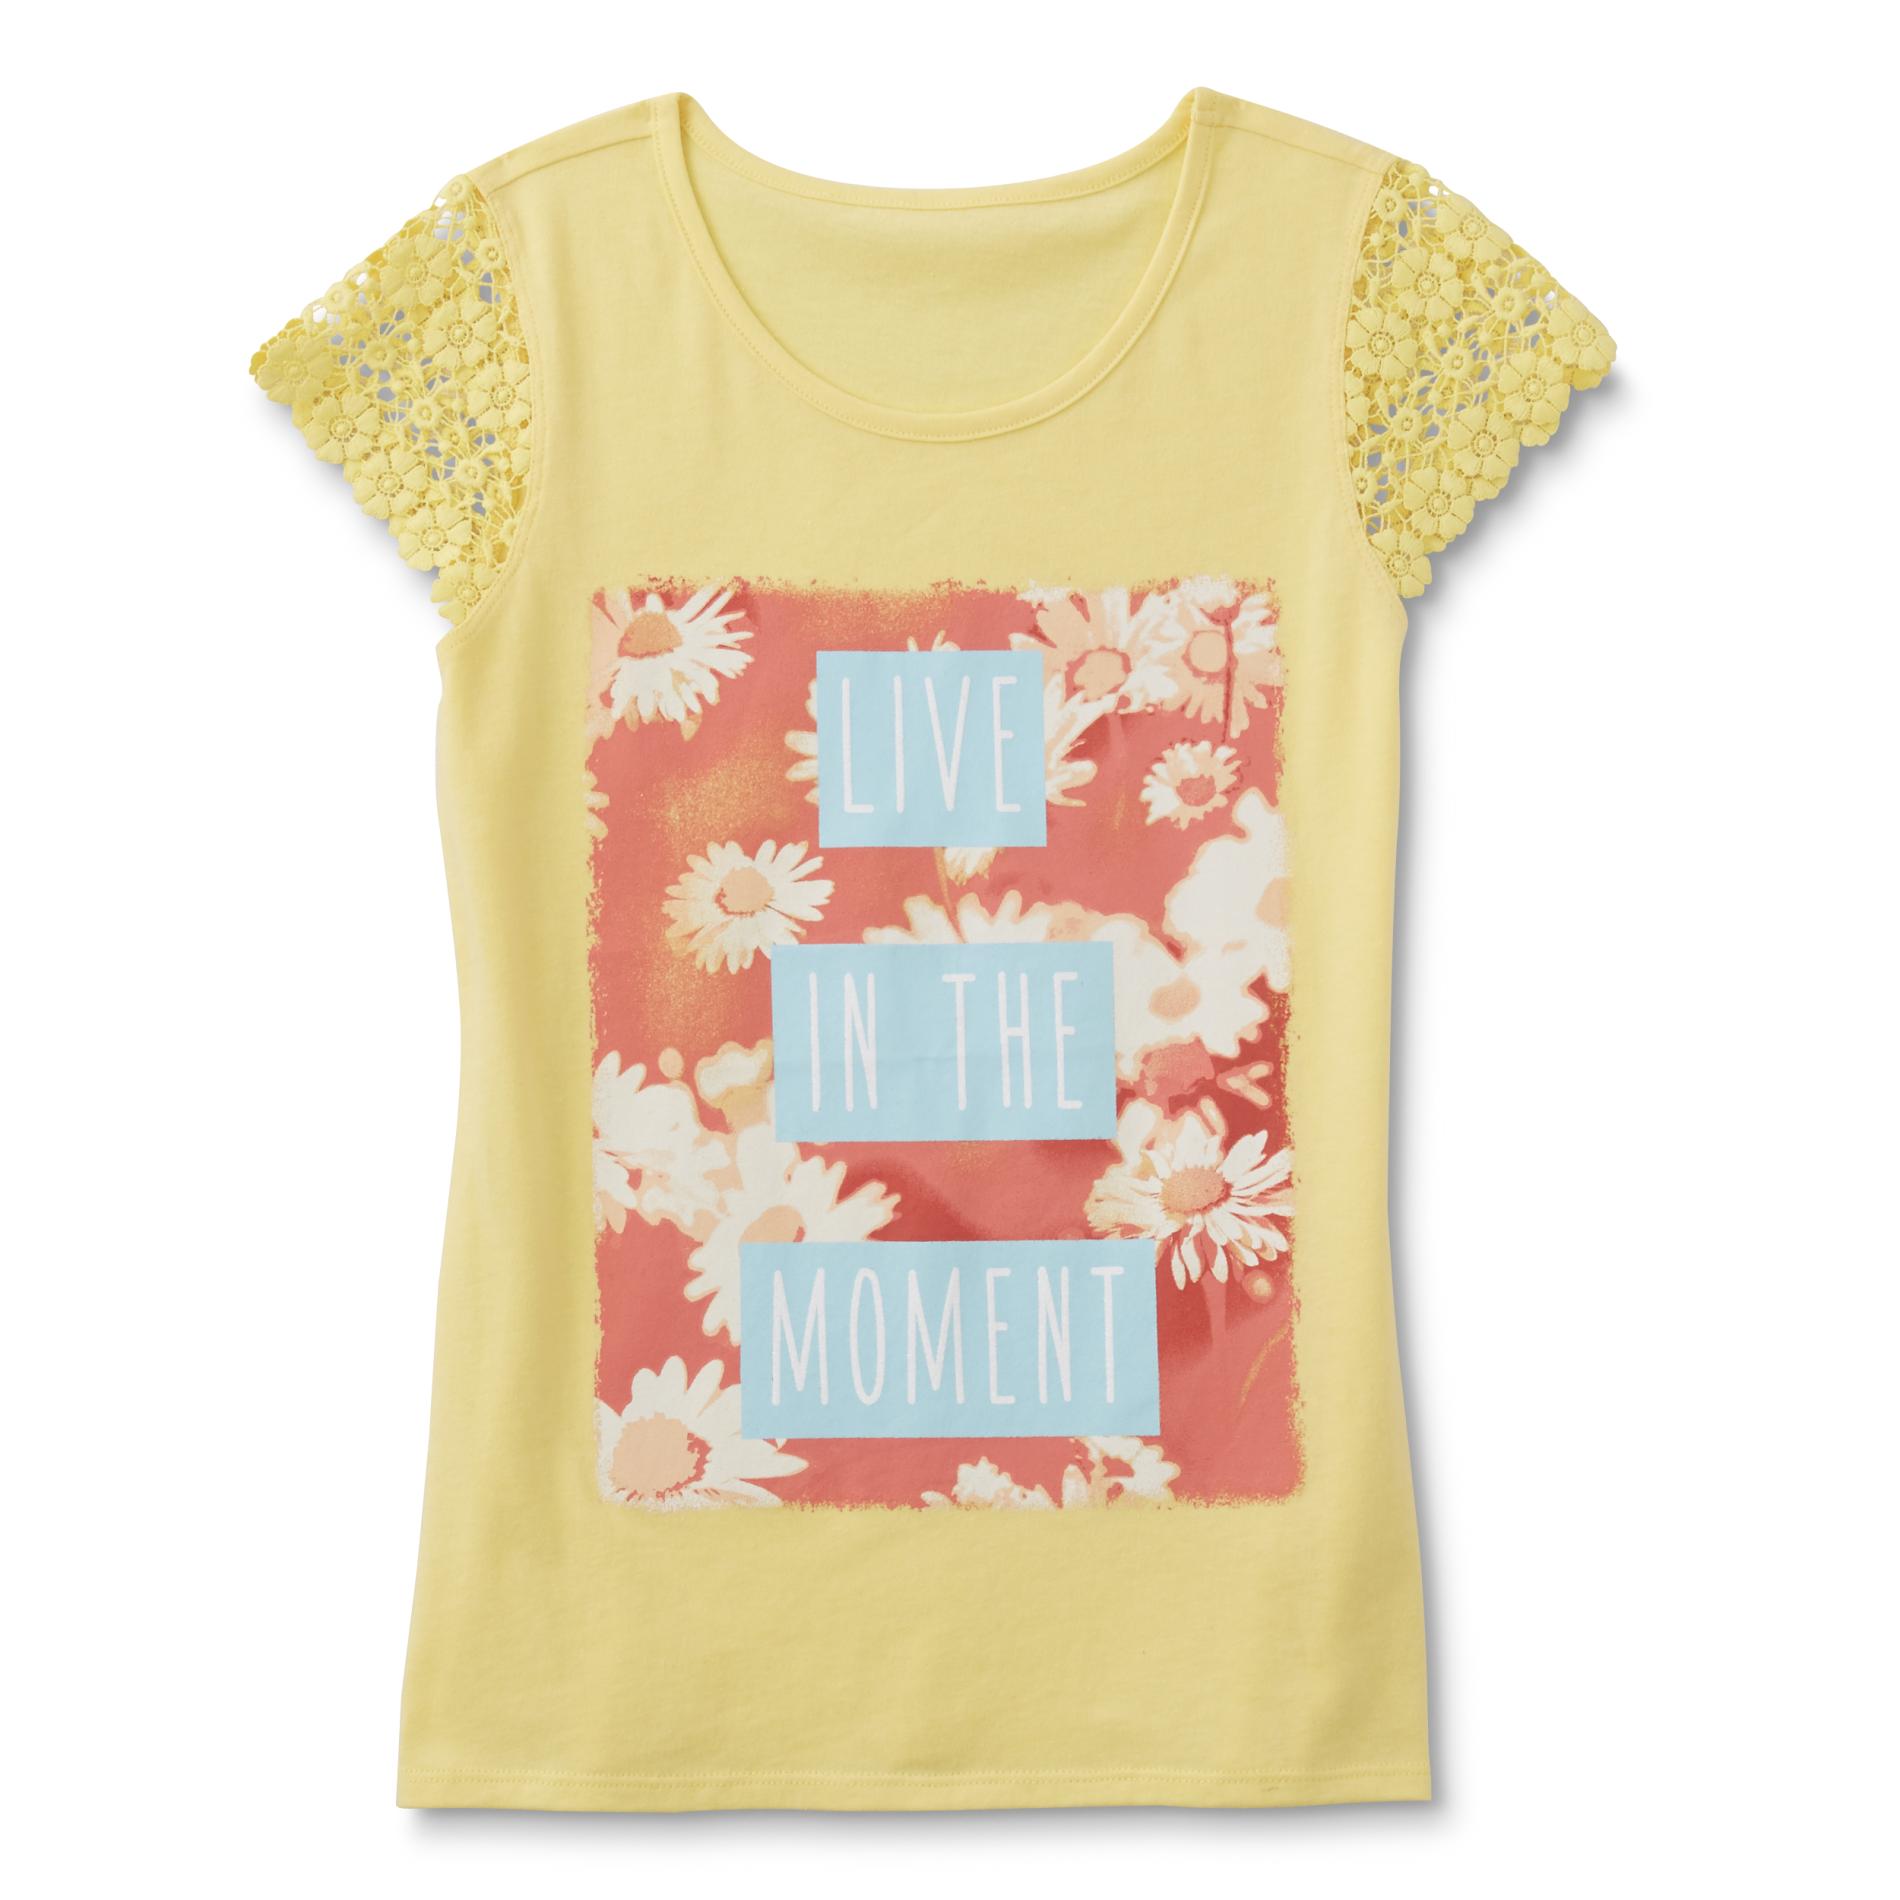 Canyon River Blues Girls' Printed Top - Live in the Moment